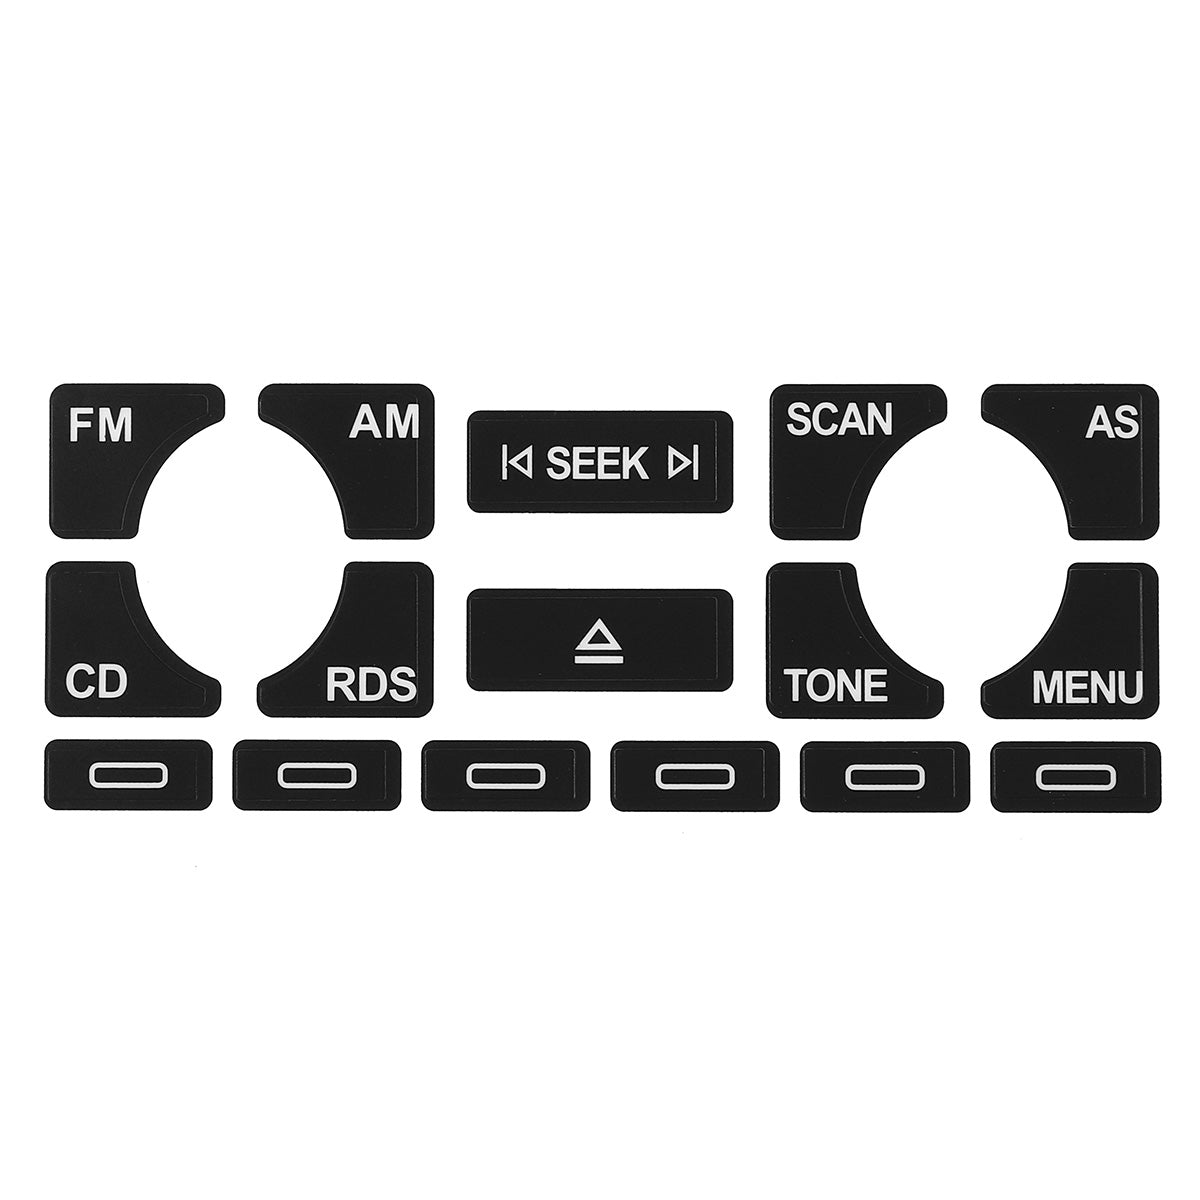 Car Radio Stereo Worn Peeling Button Repair Decals Stickers For Audi A4 B6 B7 A6 A2 A3 8L/P - Auto GoShop